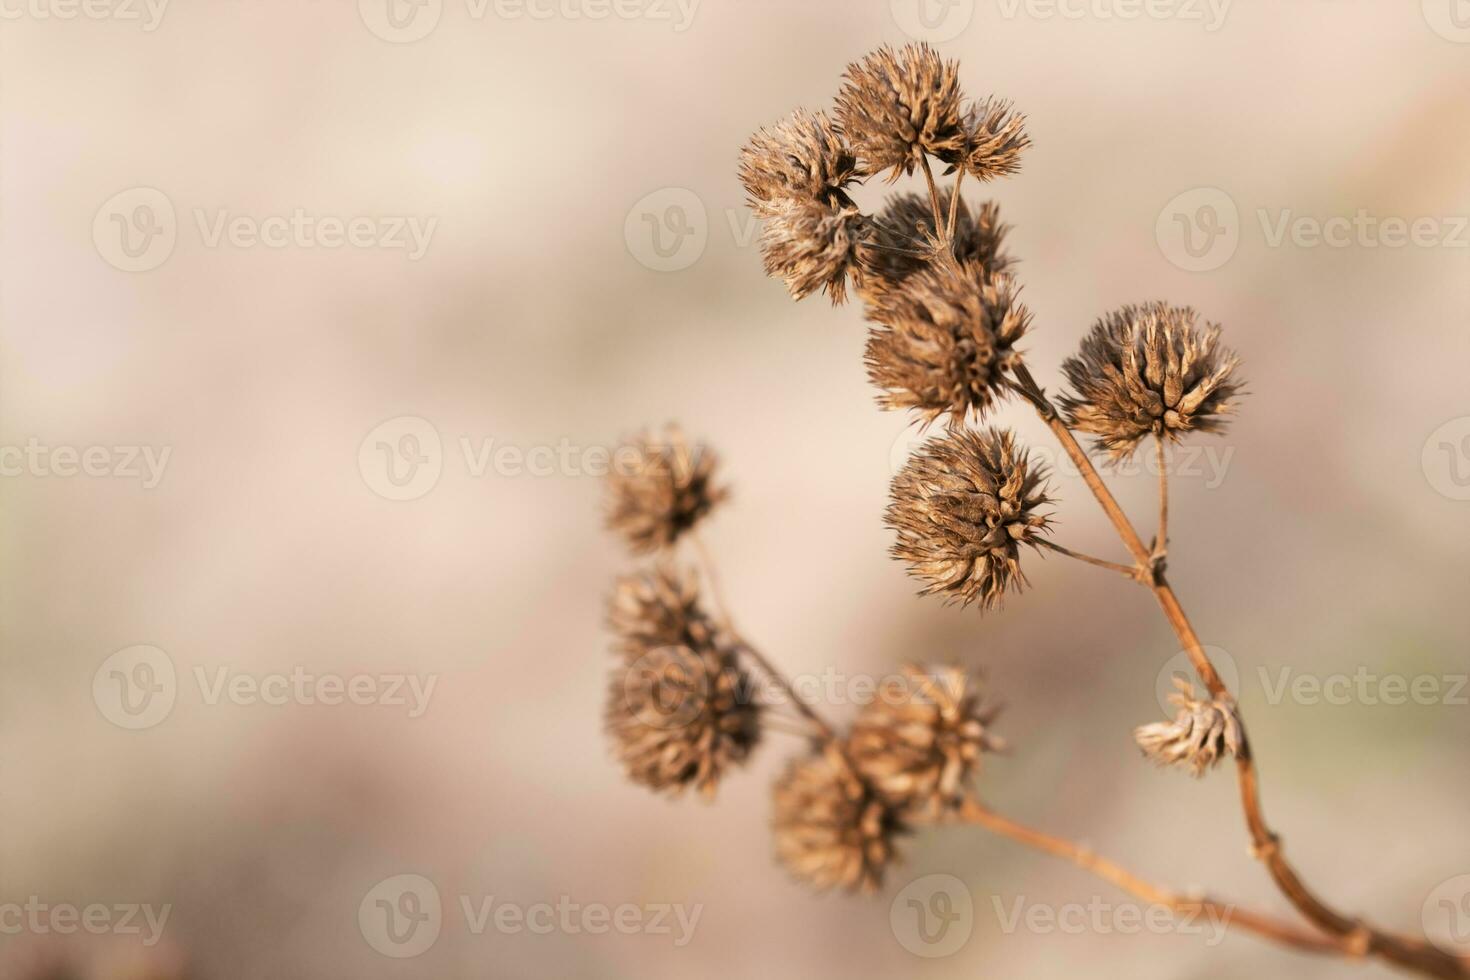 Dry flower, grass meadow outdoor. vintage filter photo